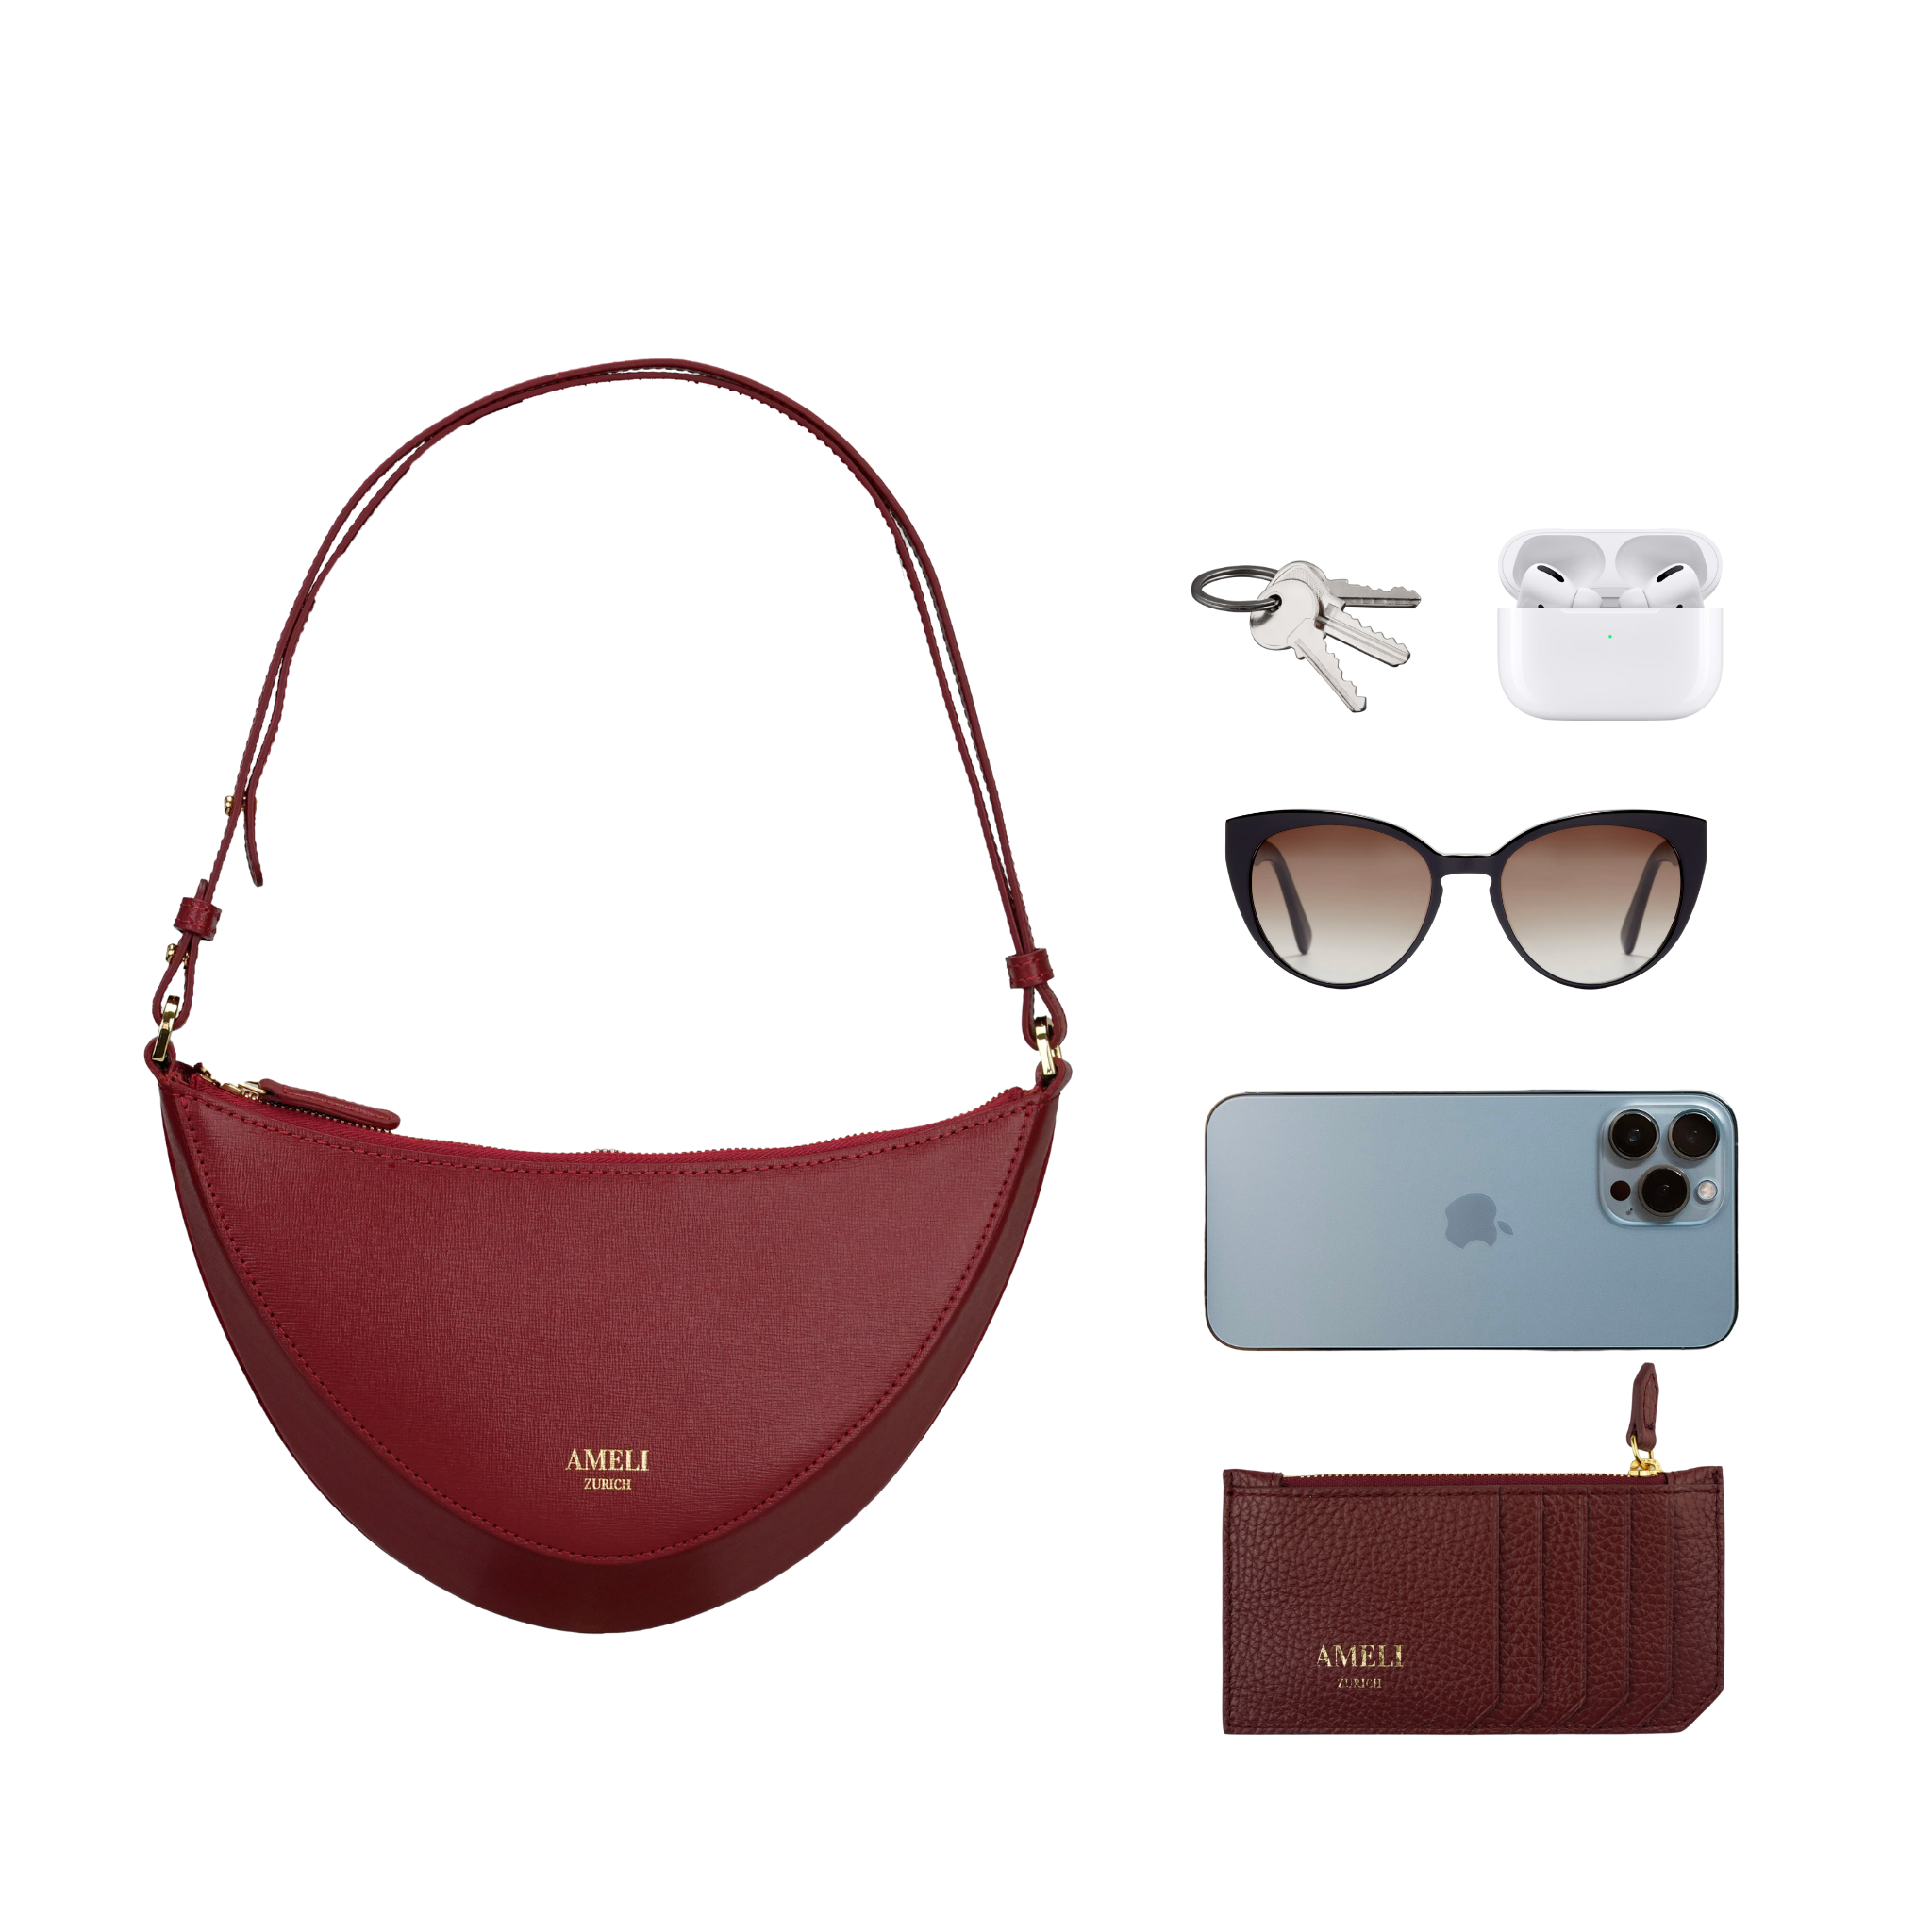 AMELI Zurich | HELVETIA | Red | Saffiano Leather | What fits inside